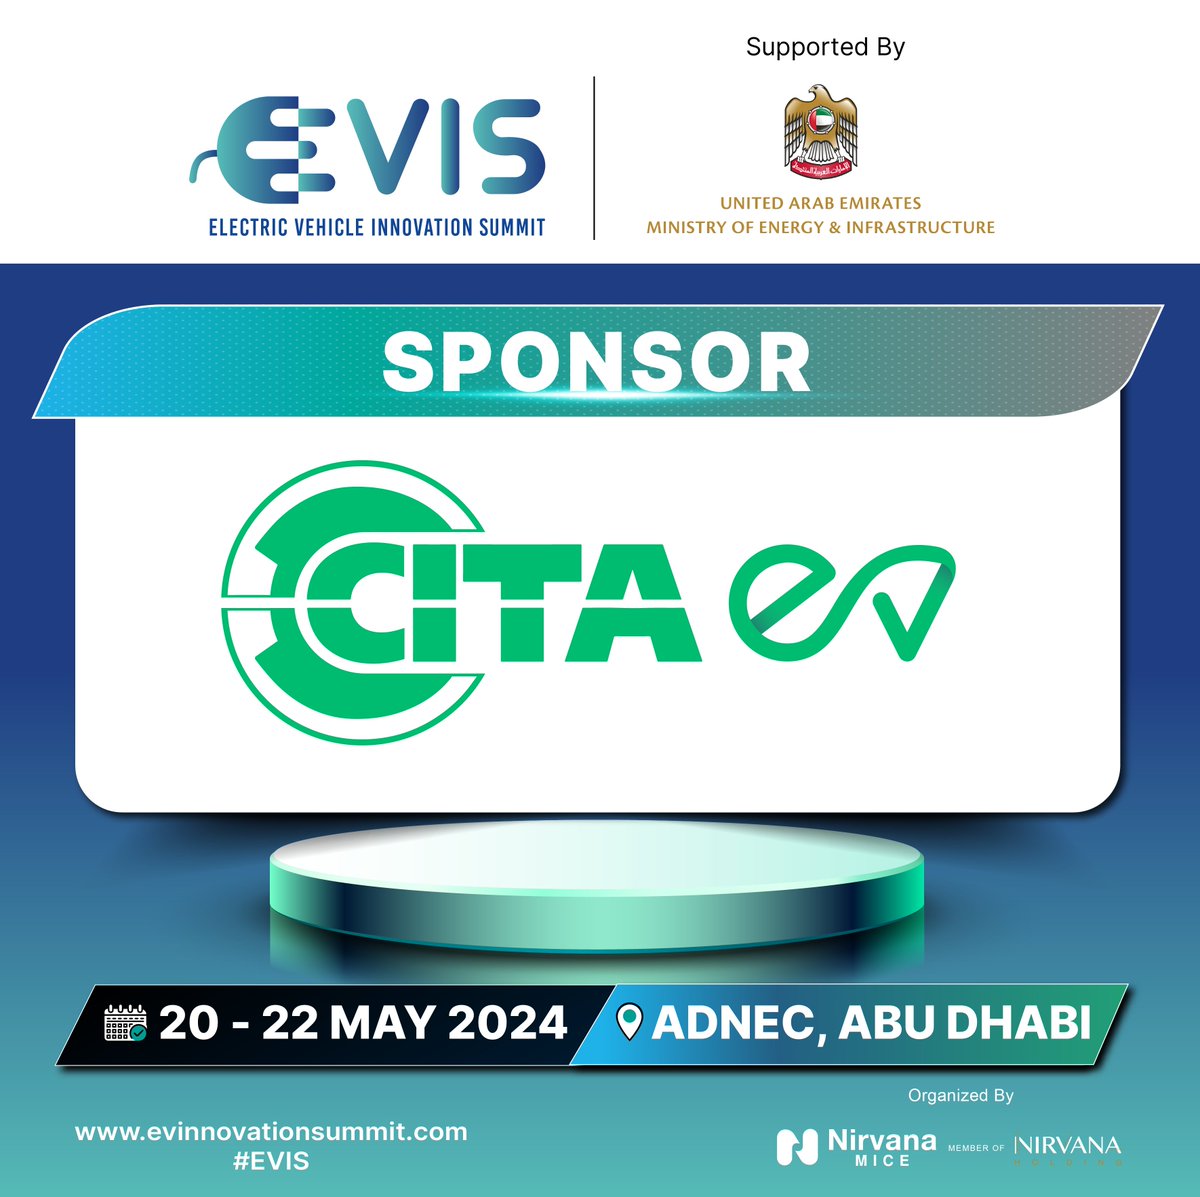 Exciting news! @citaevcharger  is teaming up with EVIS for a sustainable future! 
 As a proud sponsor of EVIS 2024, CITA brings cutting-edge charging solutions to power the electric vehicle revolution.
 Join us at ADNEC, Abu Dhabi, May 20-22, to witness innovation in action!